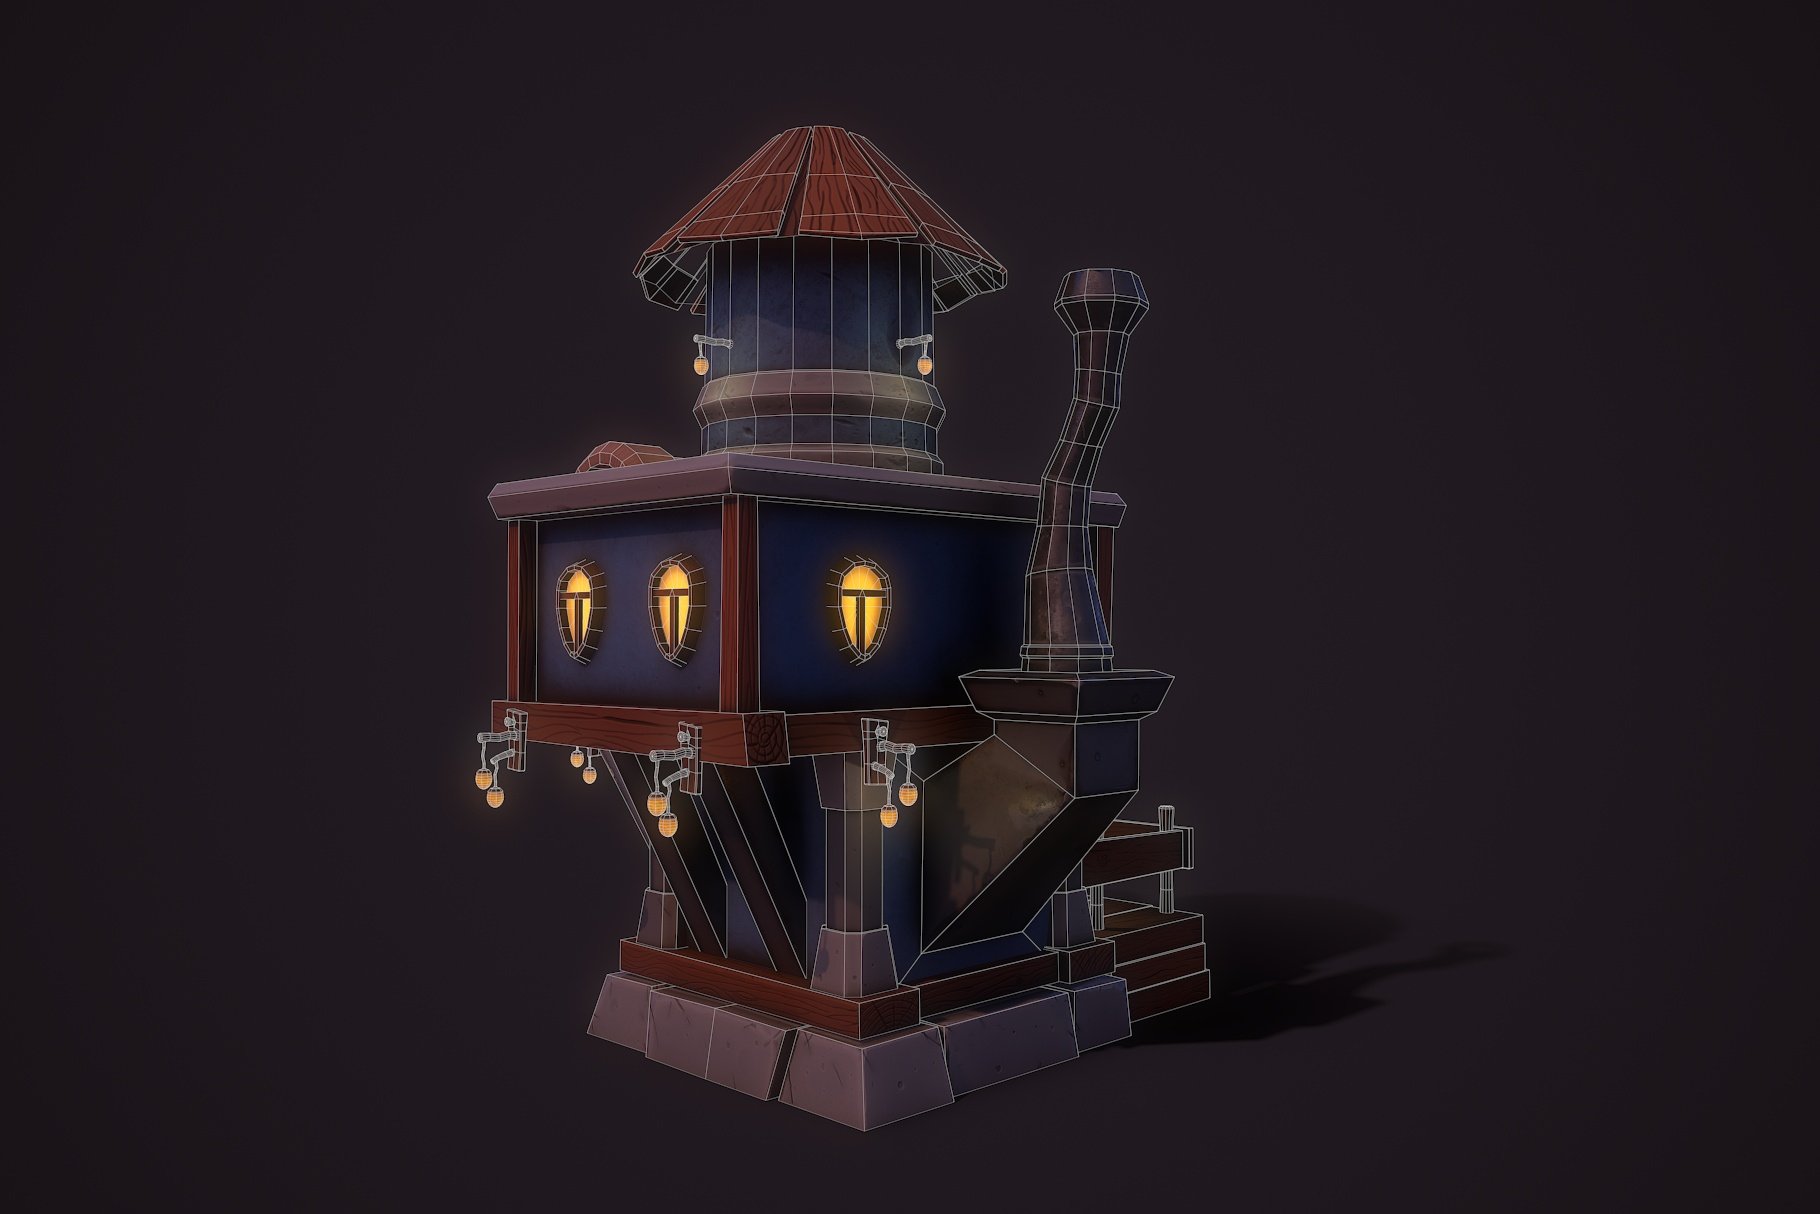 Back left graphic mockup of fantasy teapot house on a dark gray background.